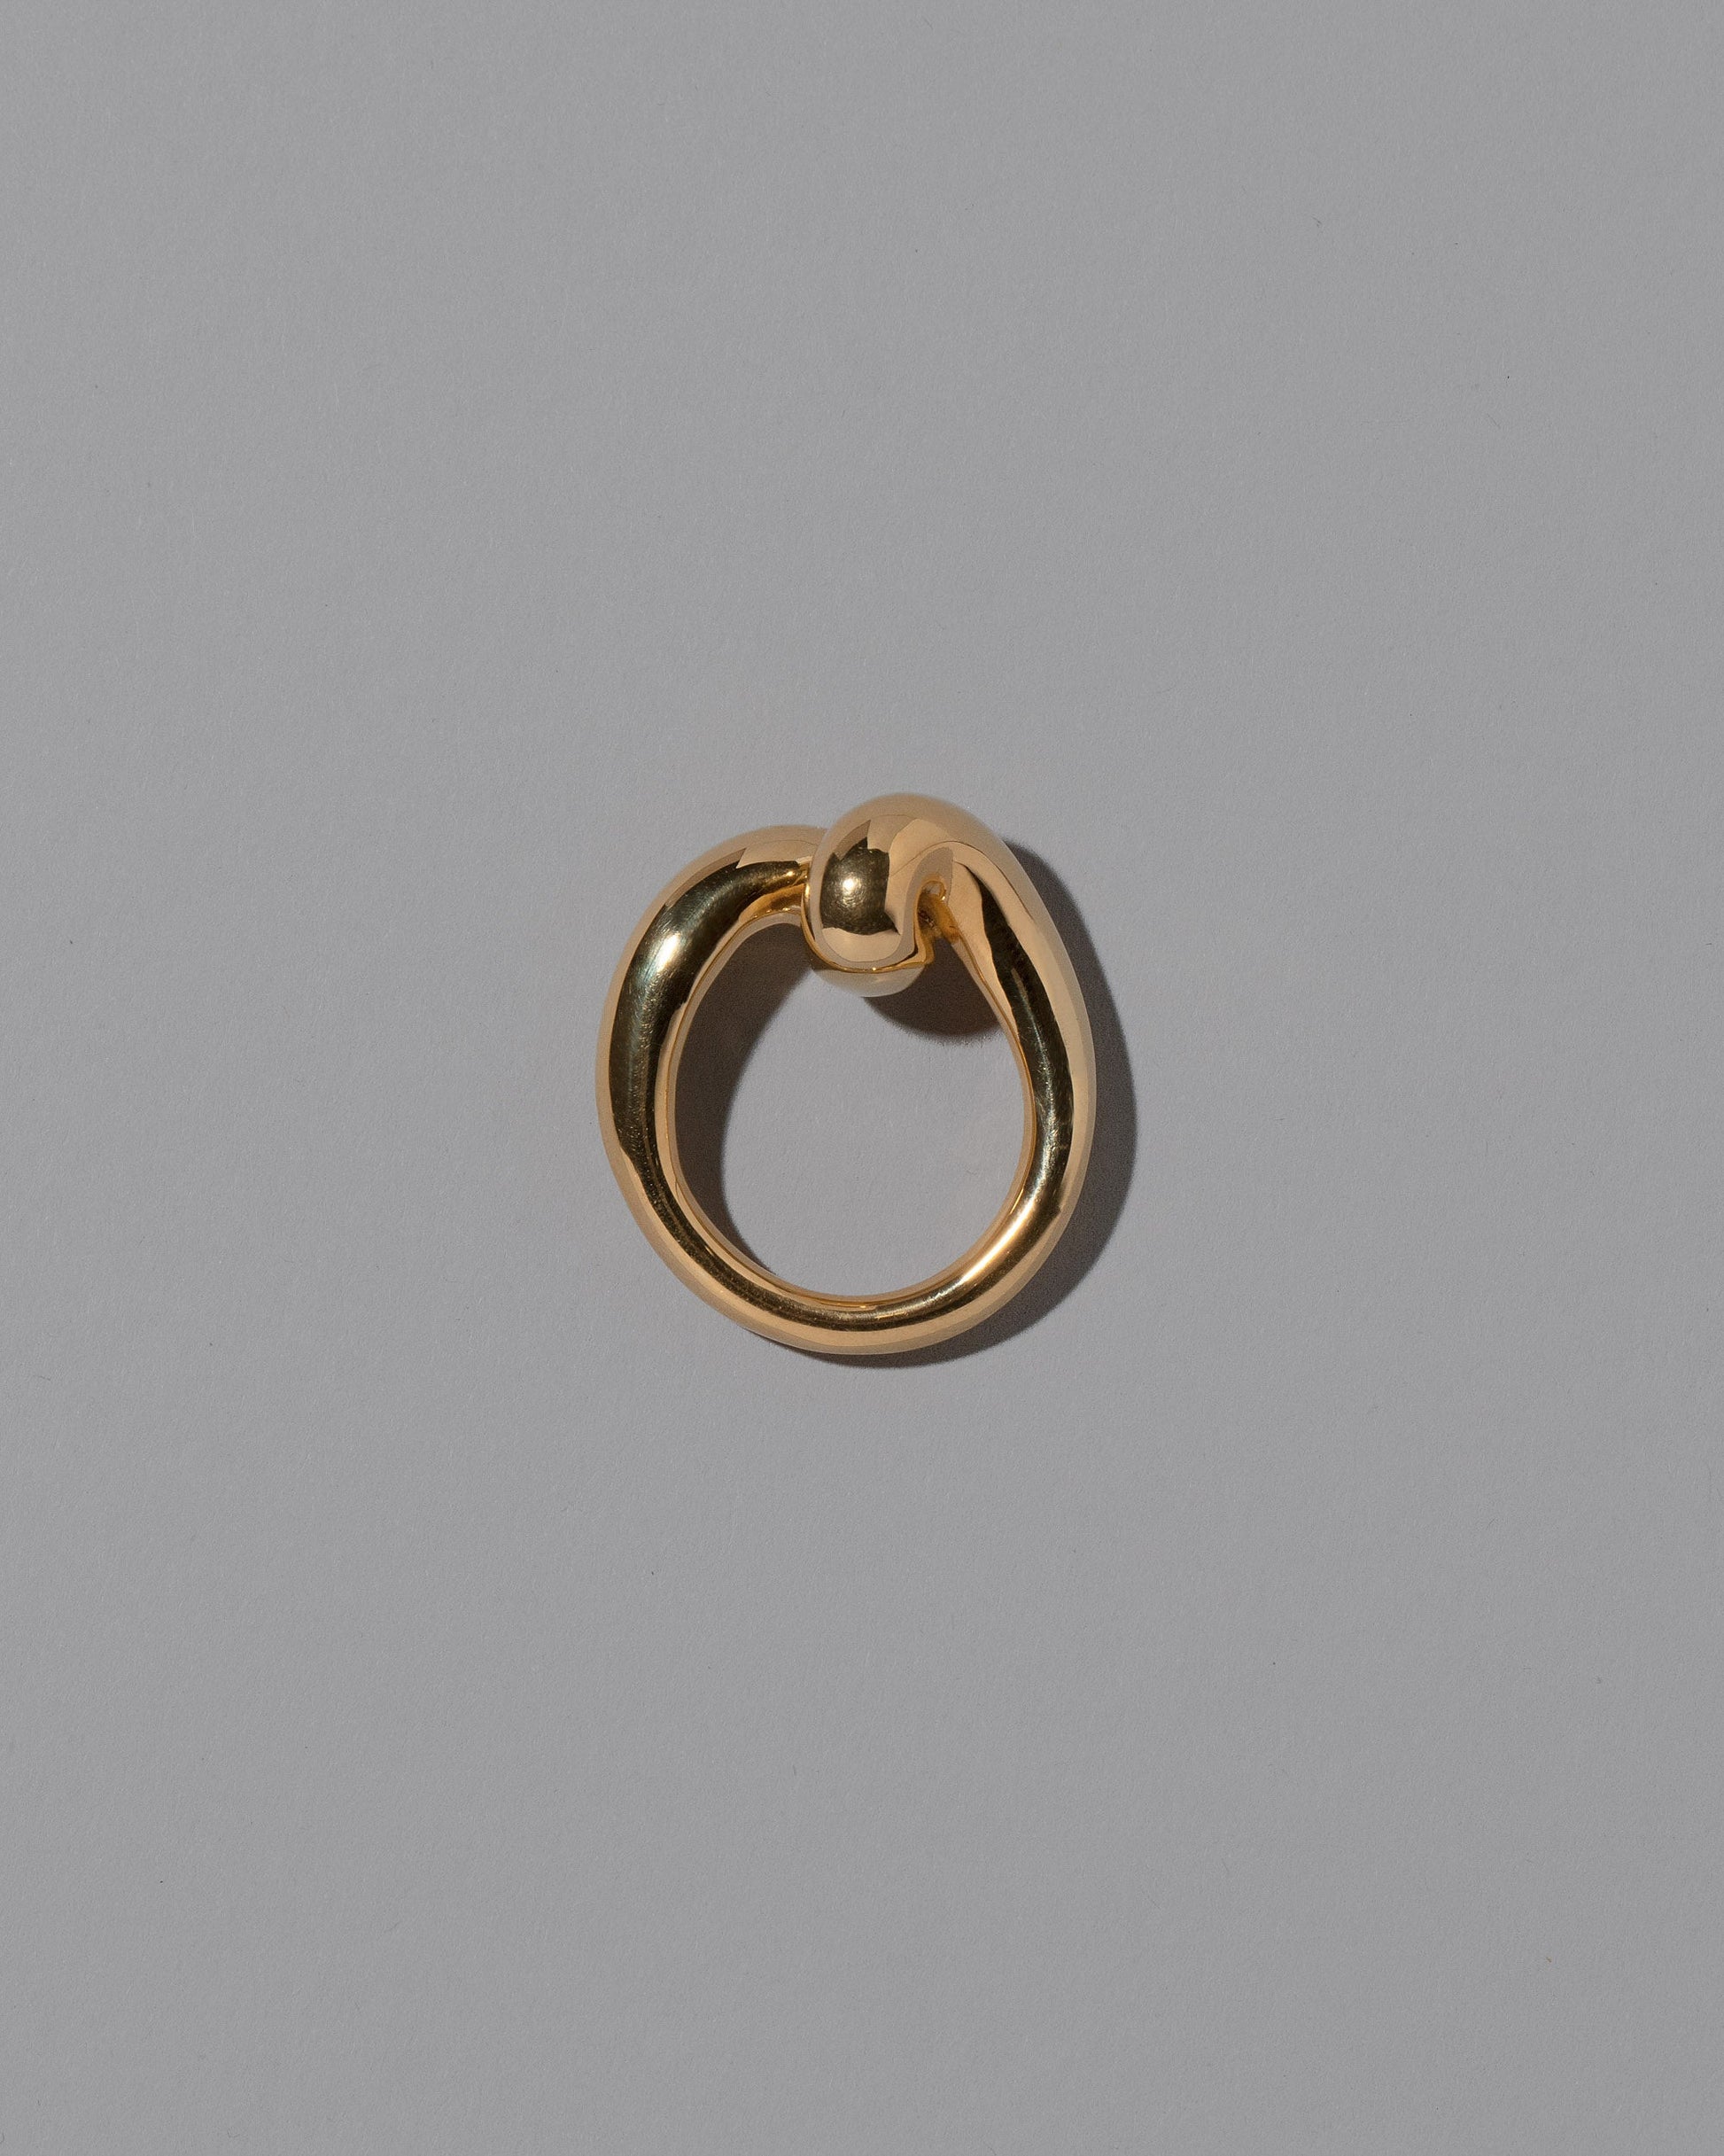 View from the side of the CRZM 22k Gold Landform Ring on light color background.